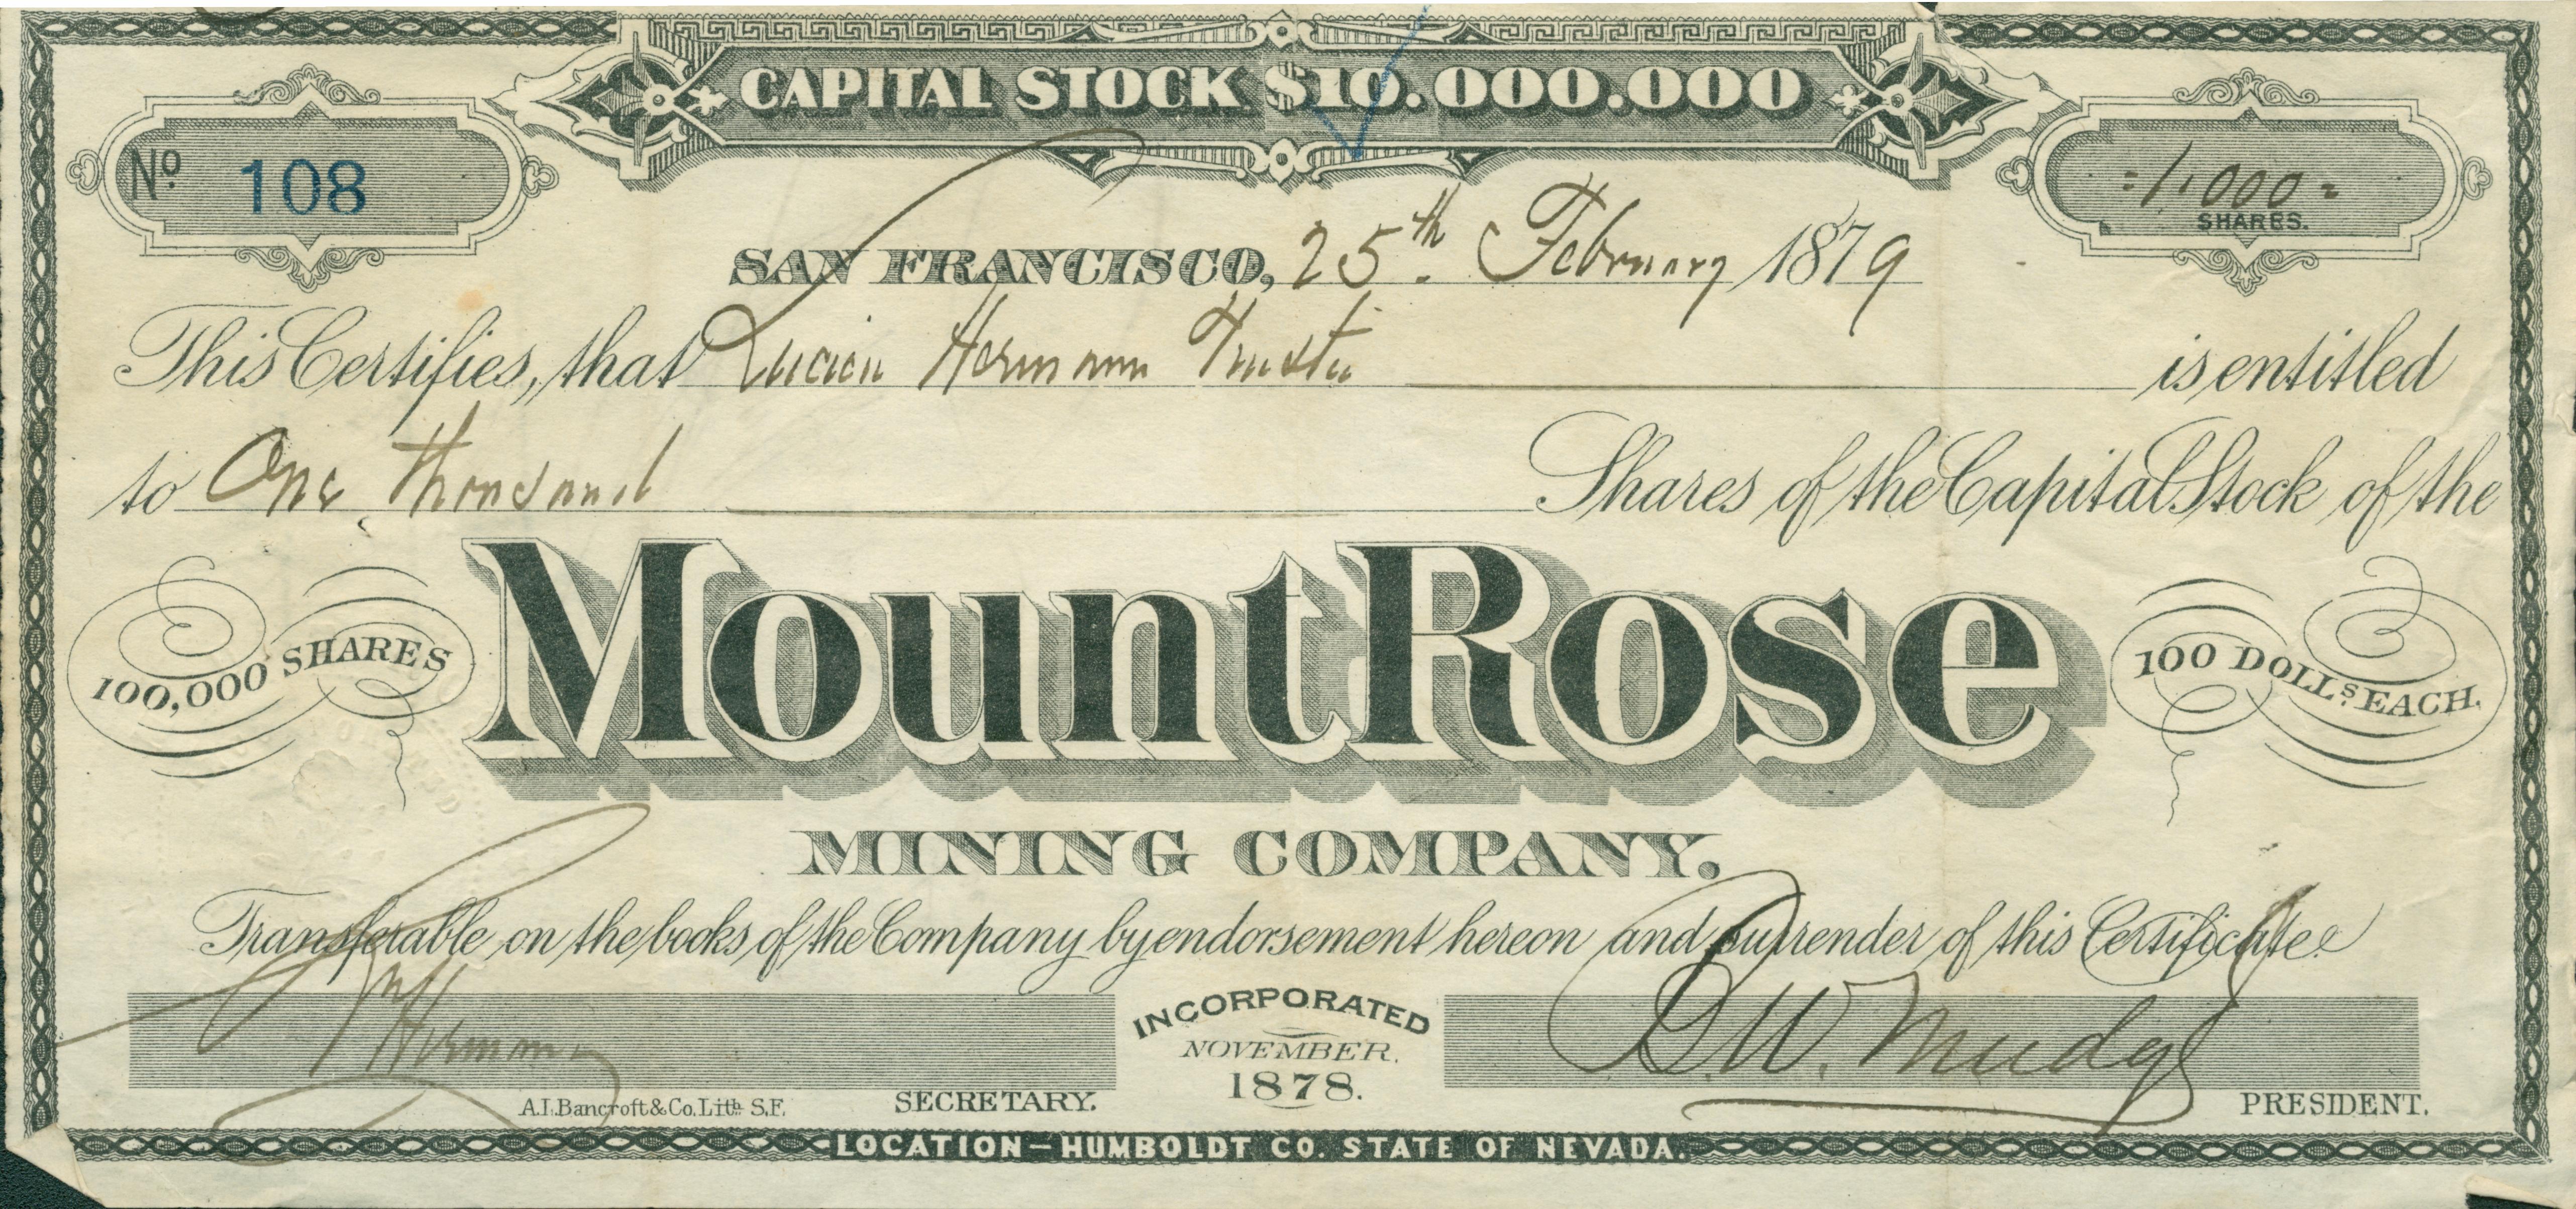 Certificate, No. 108, for 1,000 Shares, signed by Lucian Herman Wister[?]  A.L. Bancroft & Co., Lithograph, San Francisco.